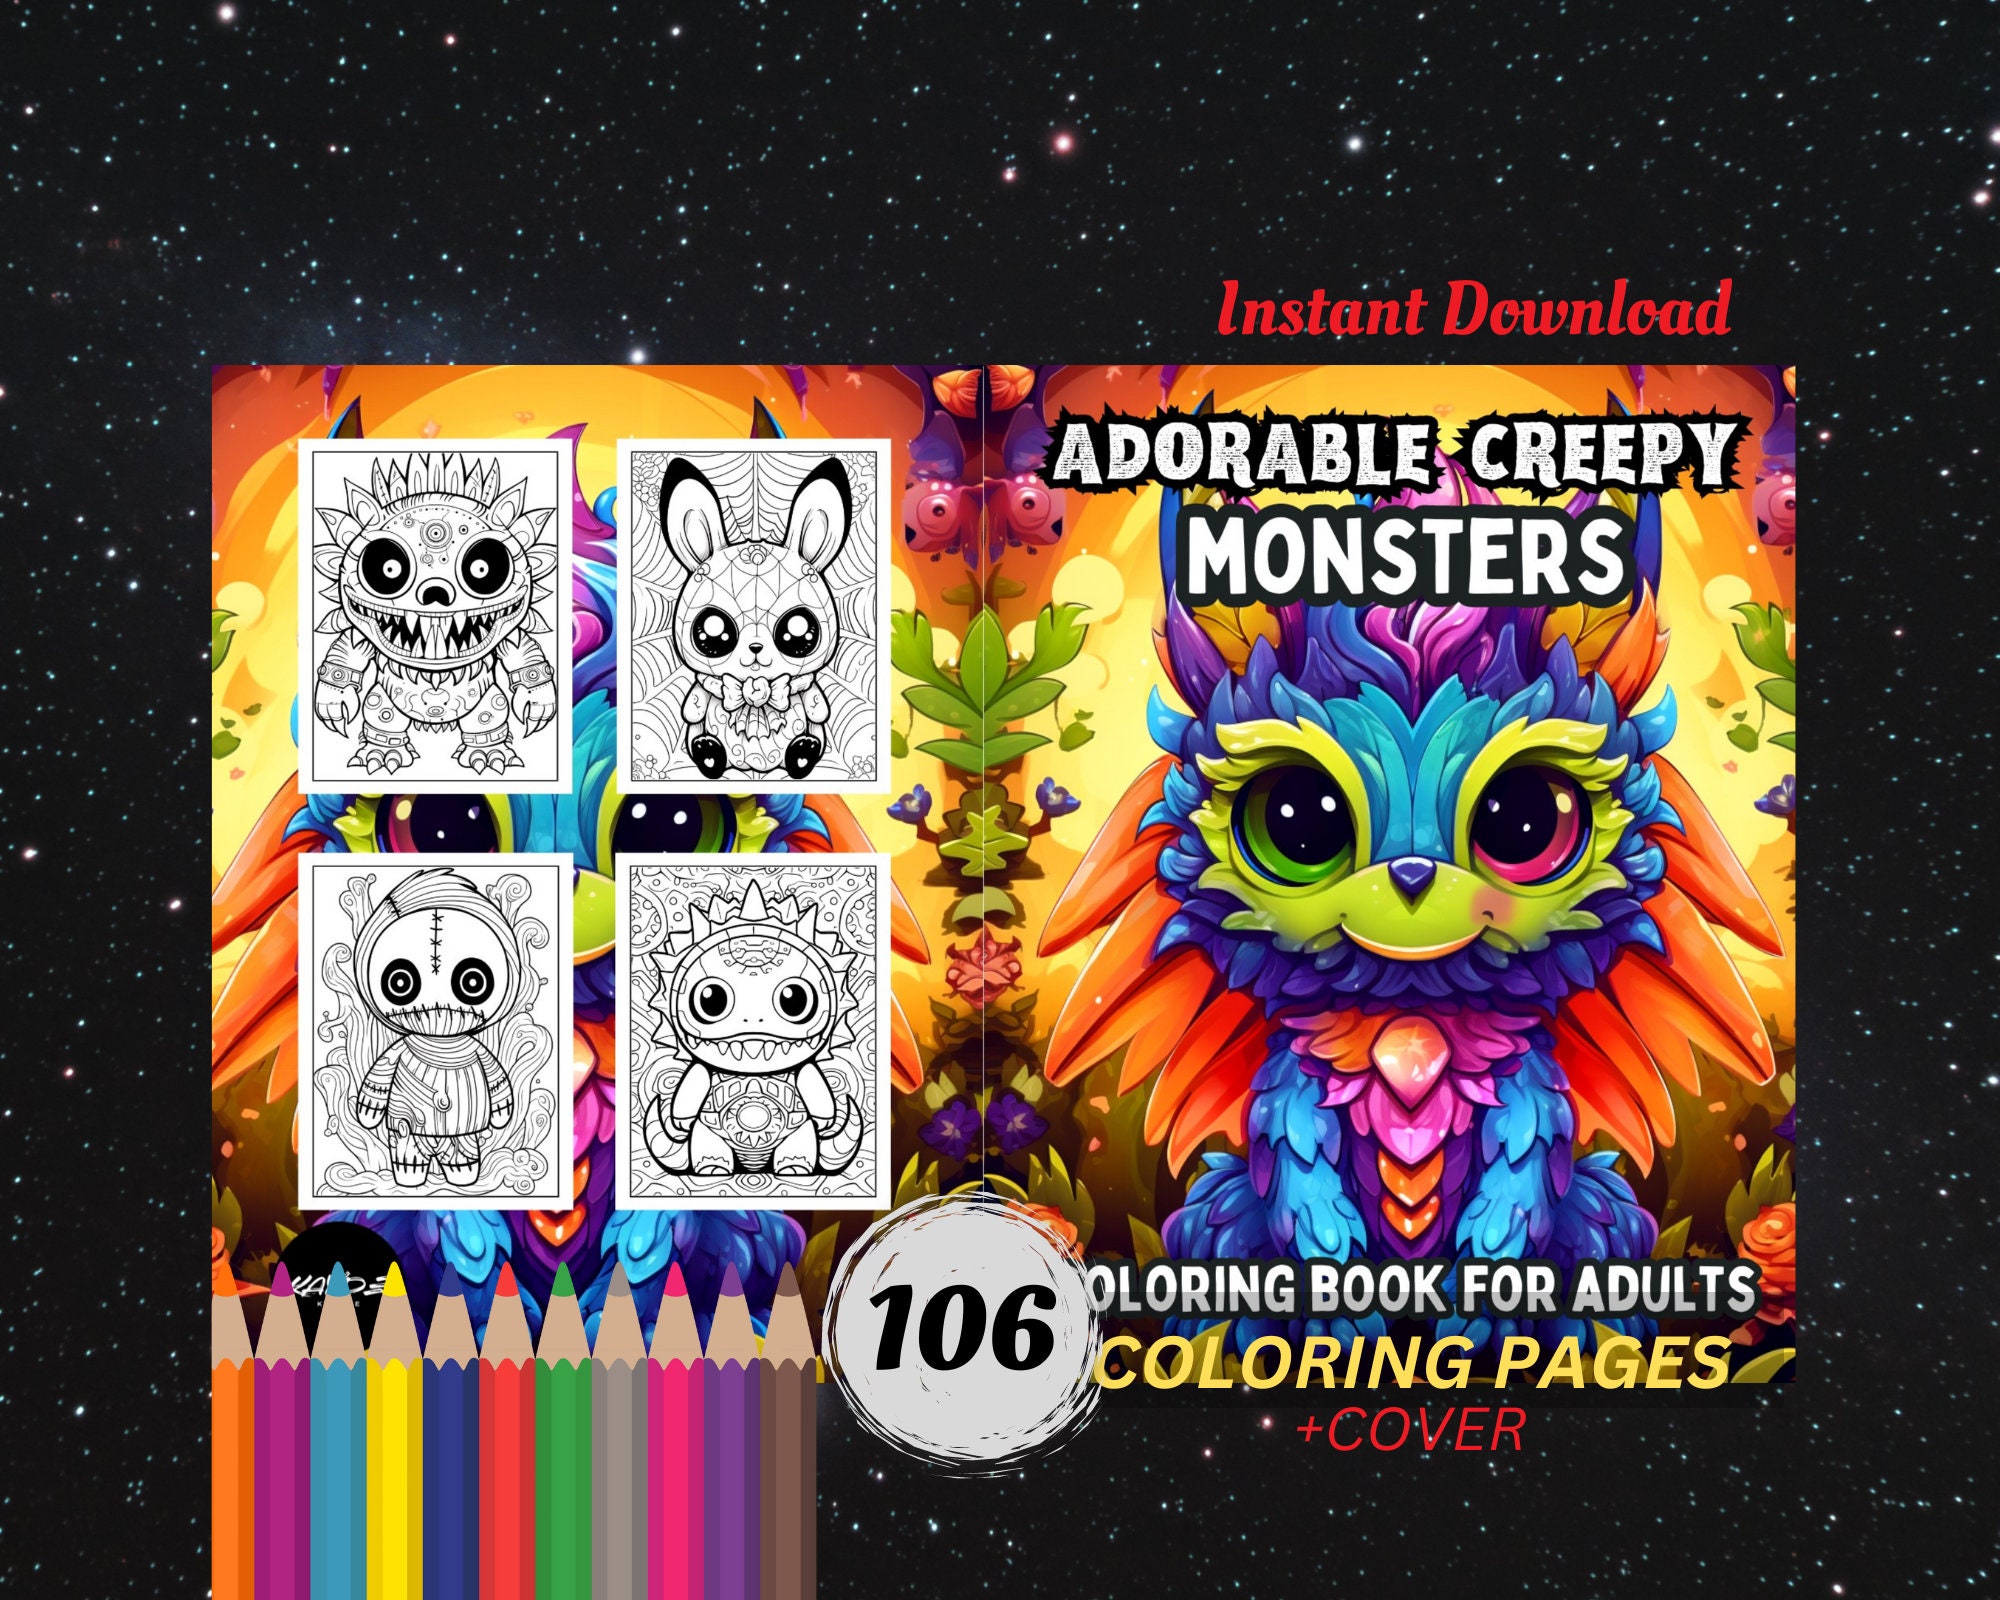 50 Adorable Creepy Monsters Coloring Book V2: for Adults and 